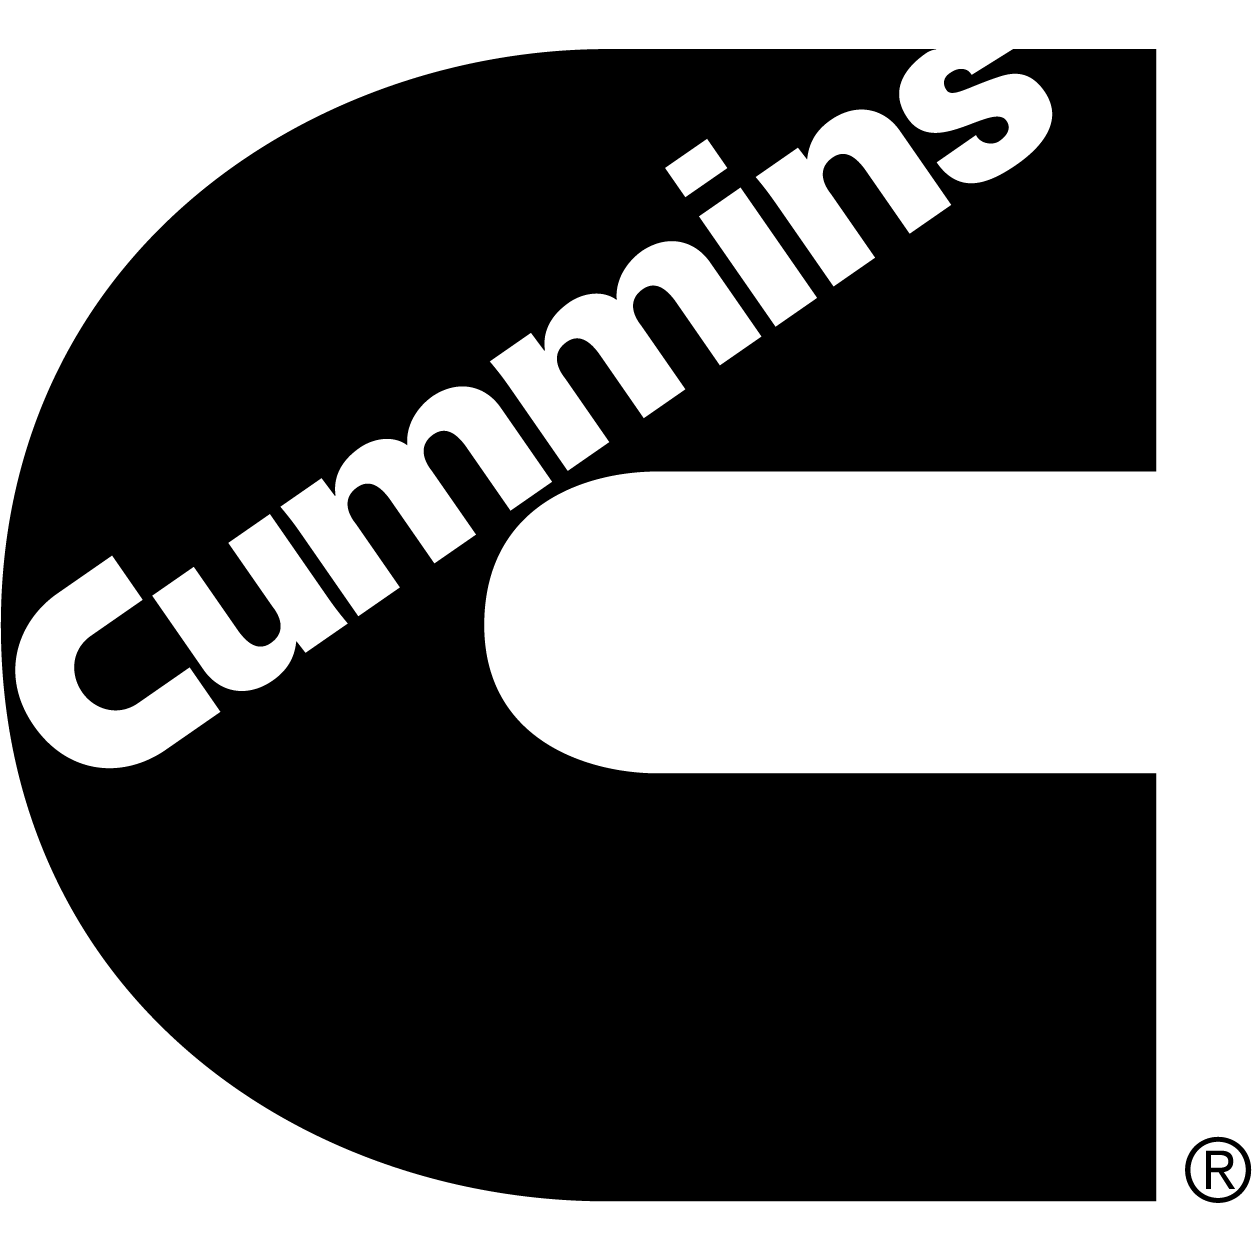 Cummins Sales and Service - (PERMANENTLY CLOSED)